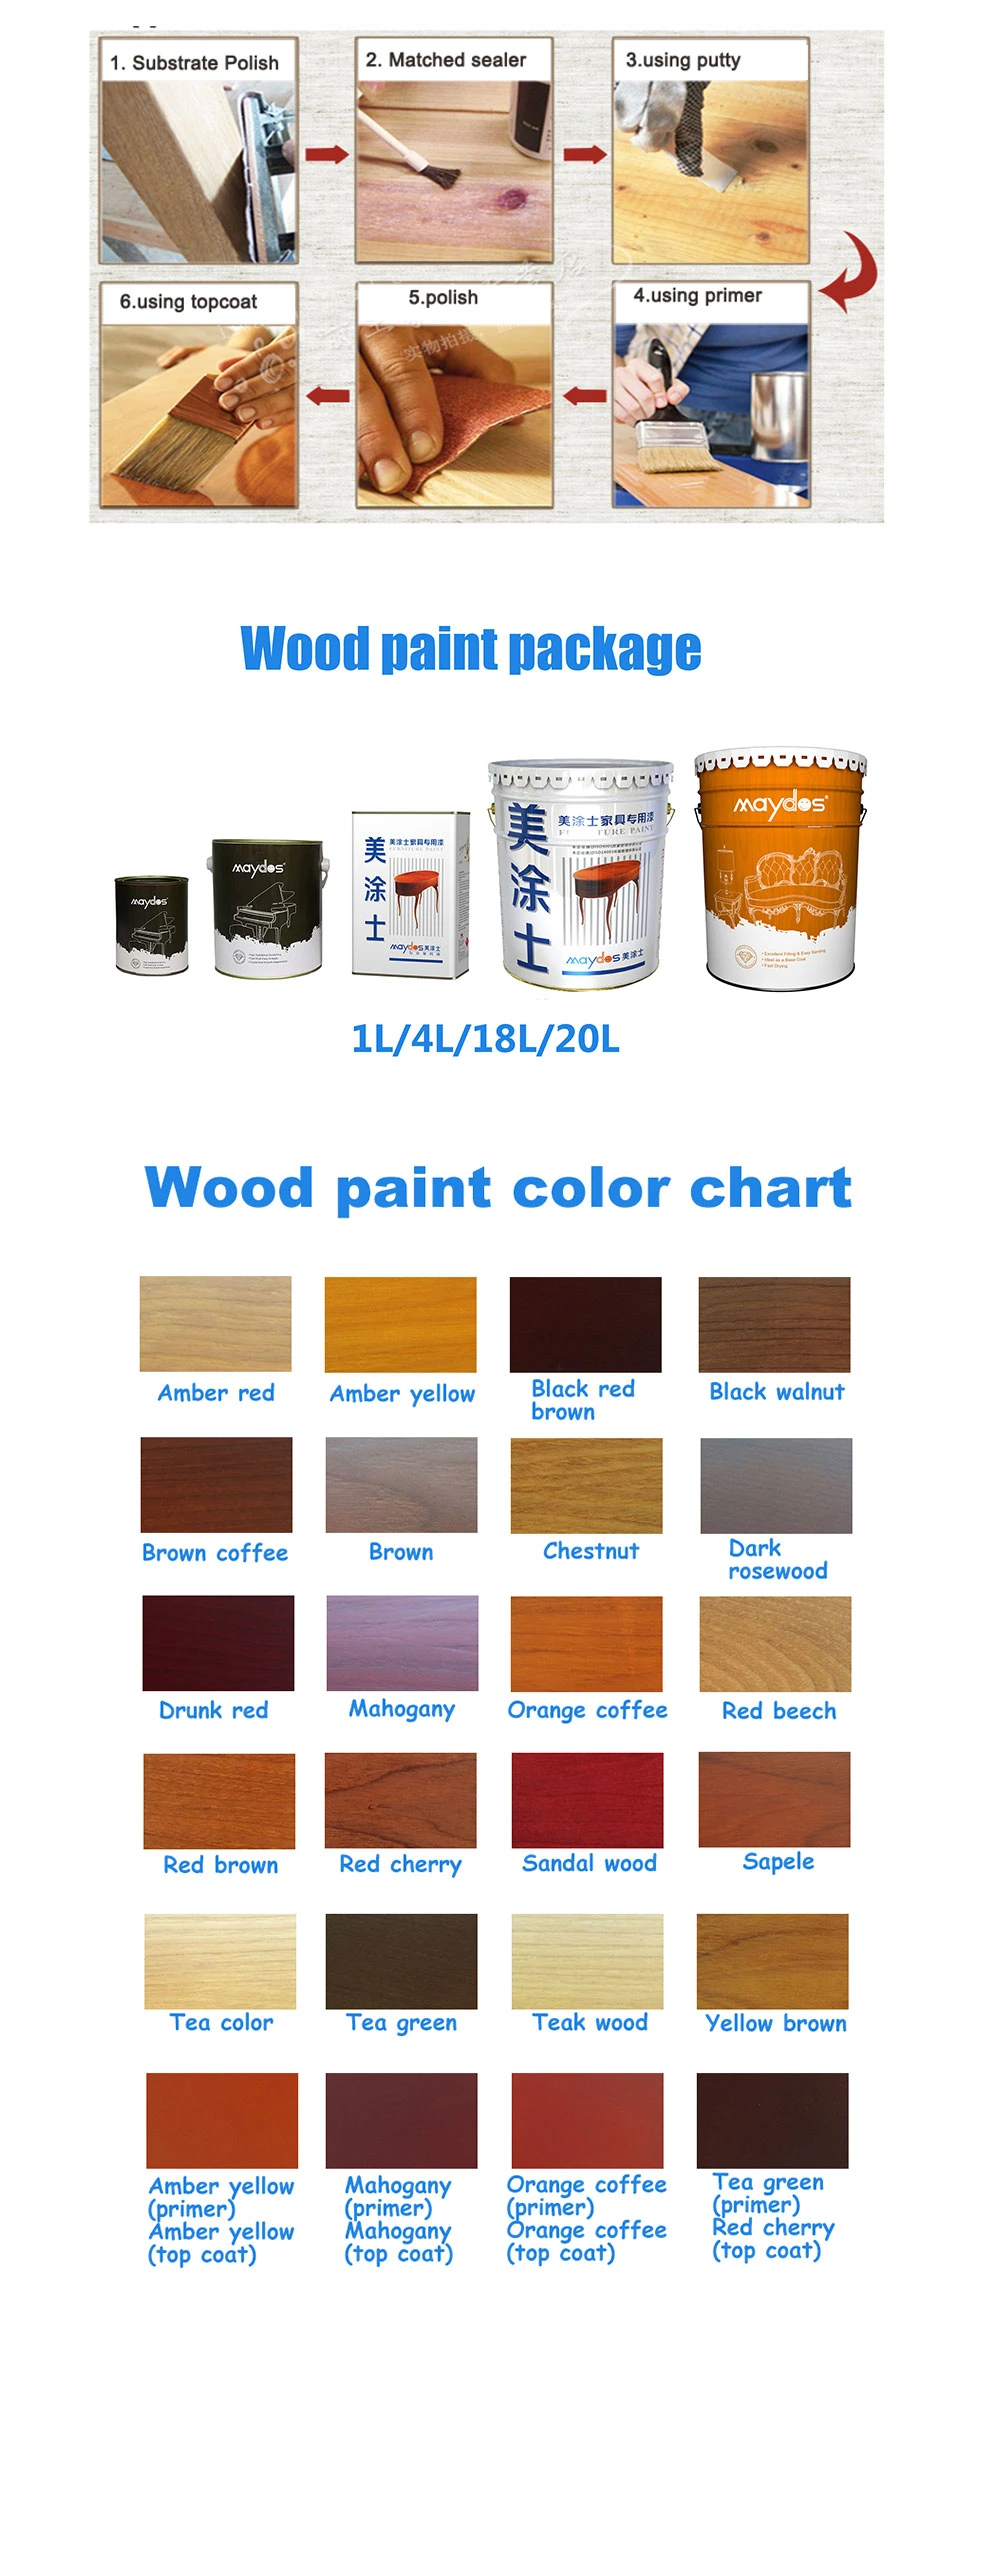 Two-Component Polyurethane PU Paint Colors for Wood Doors